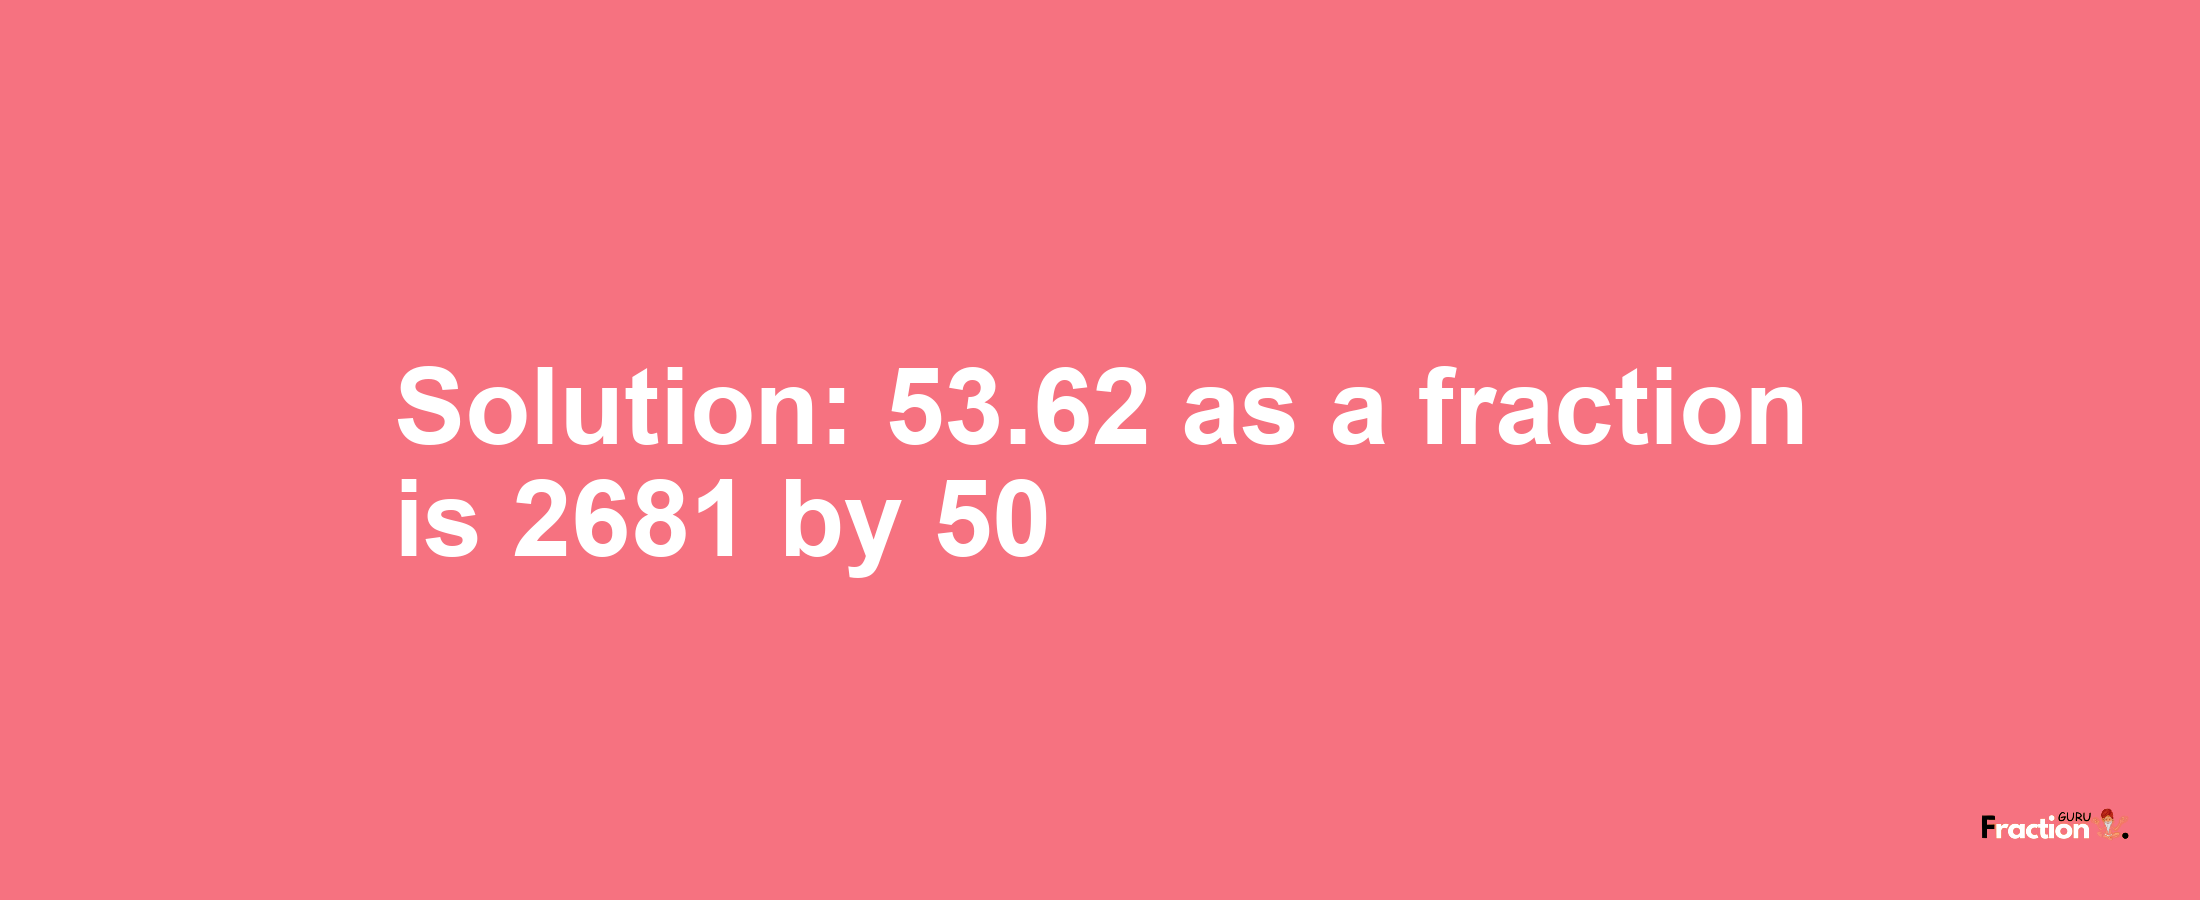 Solution:53.62 as a fraction is 2681/50